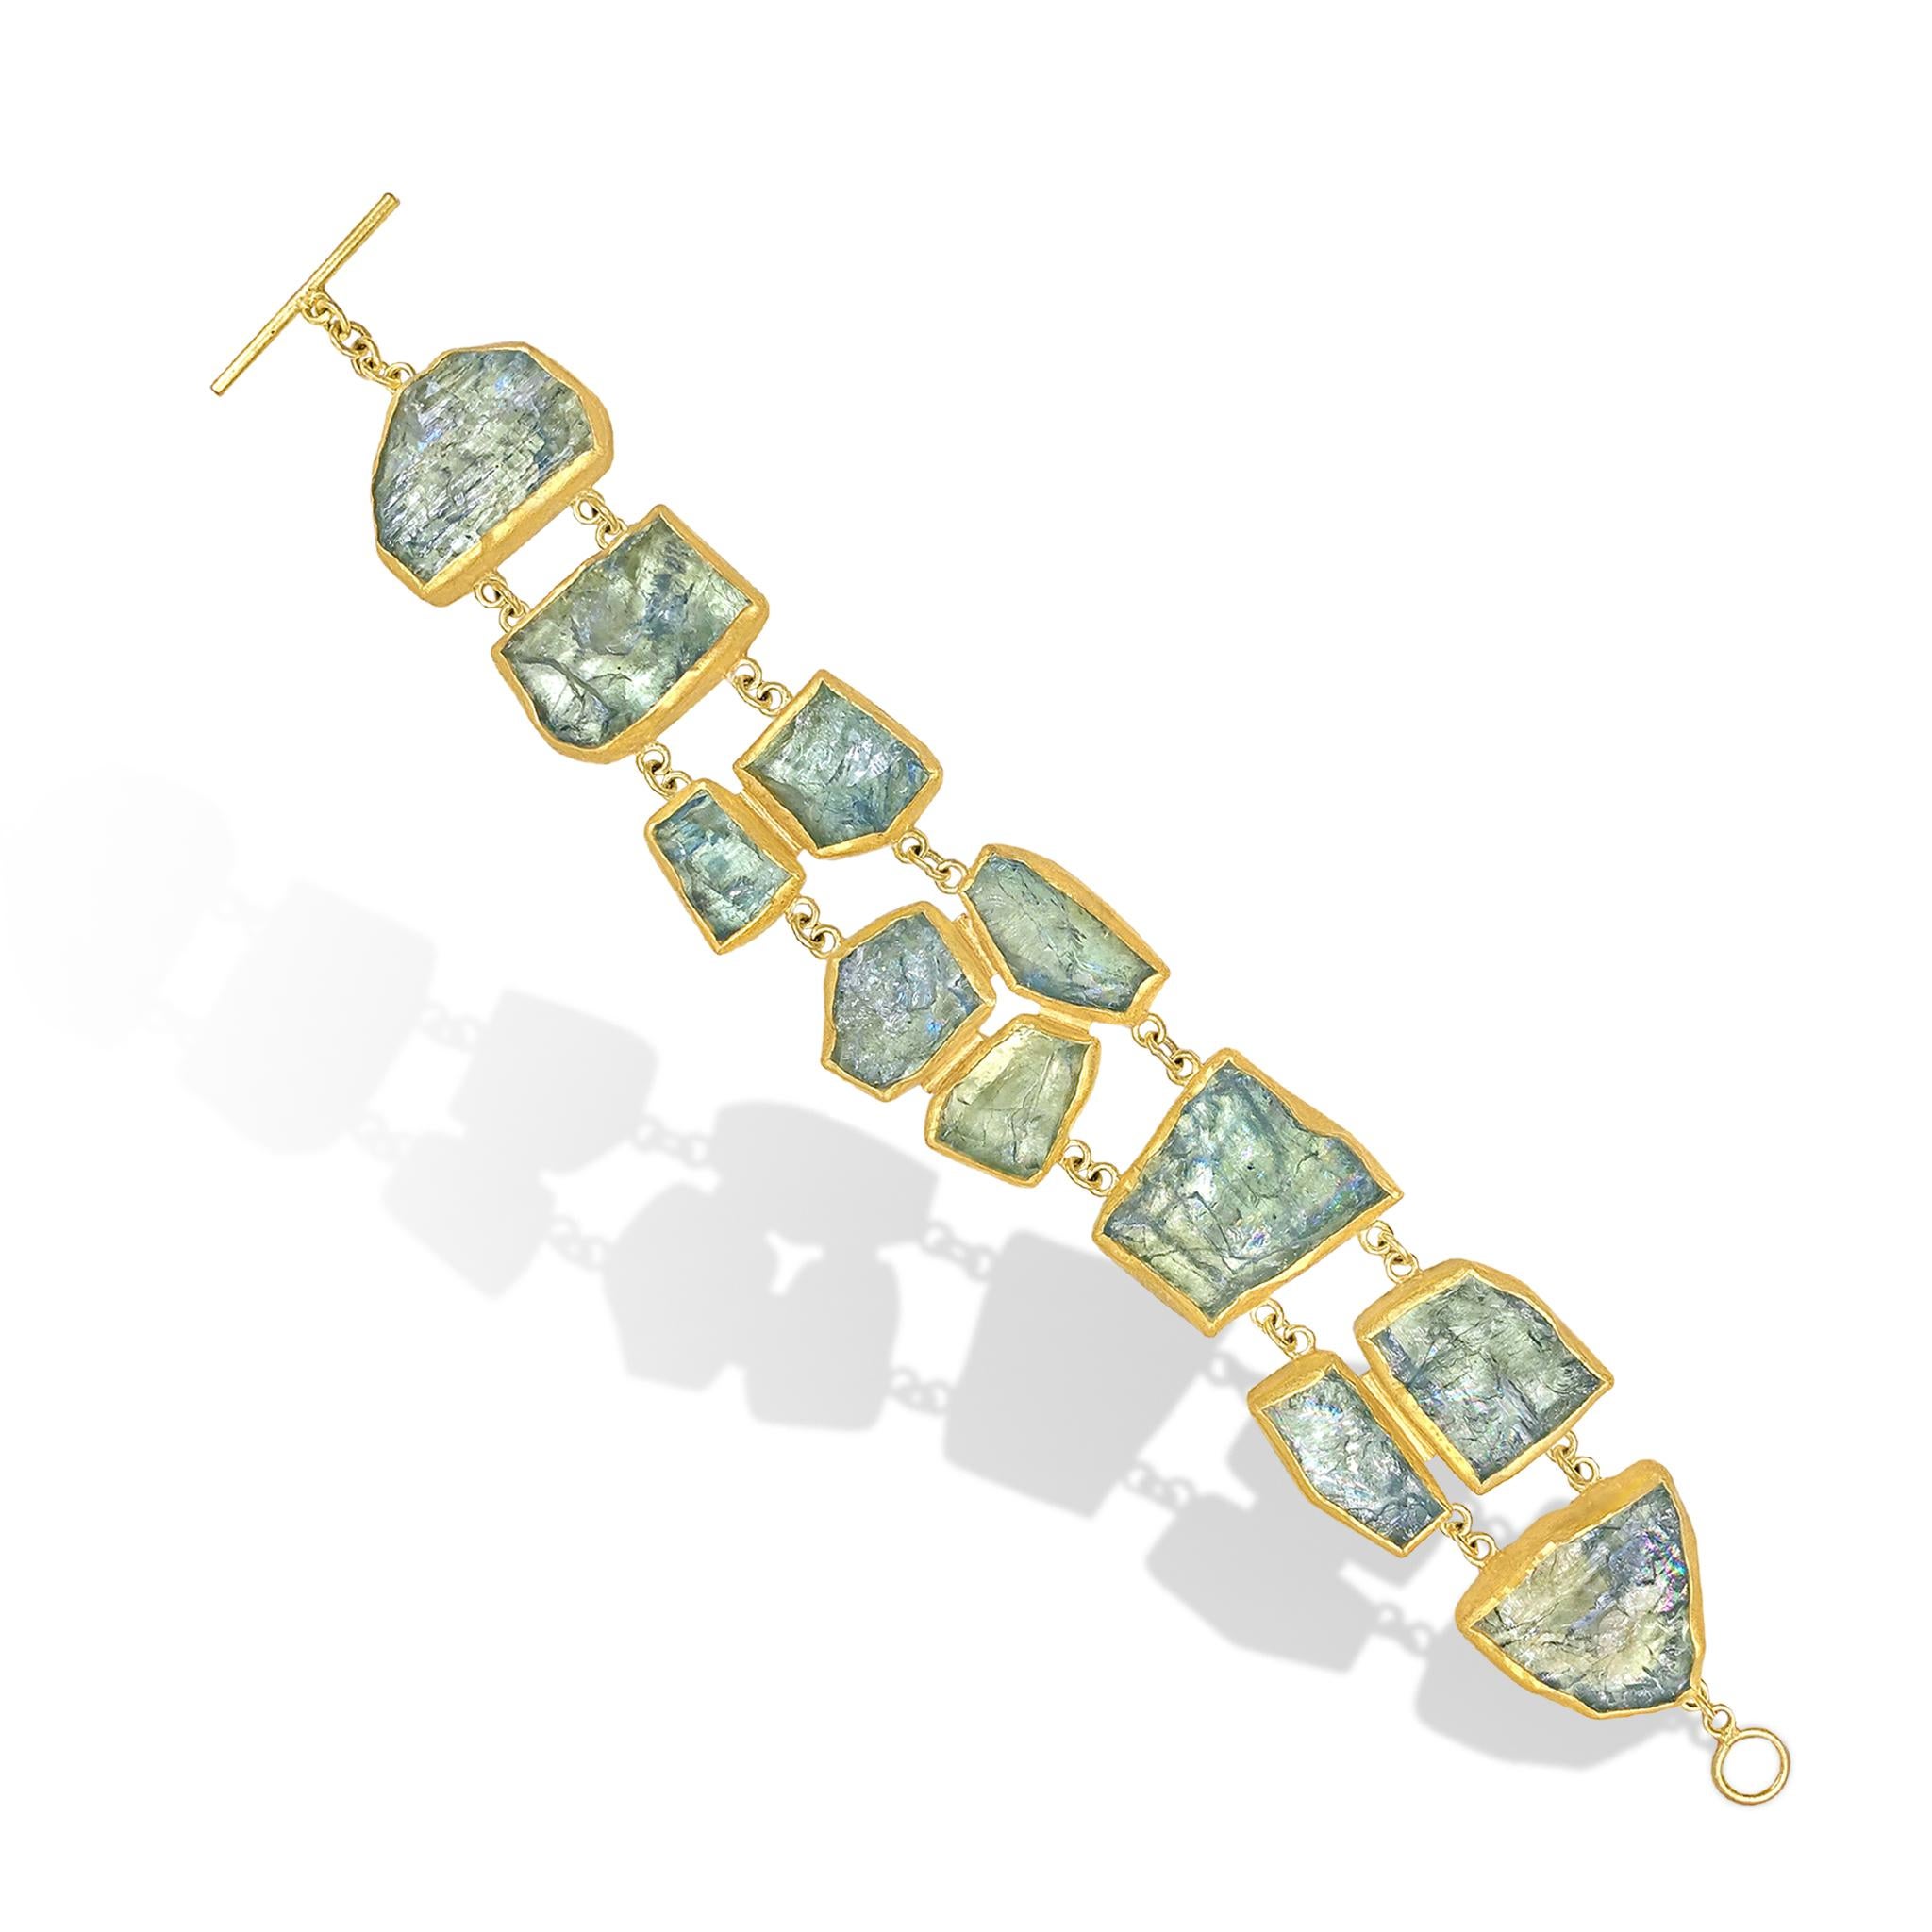 The One of a Kind Iridescent Aquamarine Double Row Bracelet is a true wearable work of art, handcrafted by acclaimed maker Petra Class featuring eleven rough aquamarine gemstones (132.0 carats) with gorgeous rainbow iridescence. The aquamarine